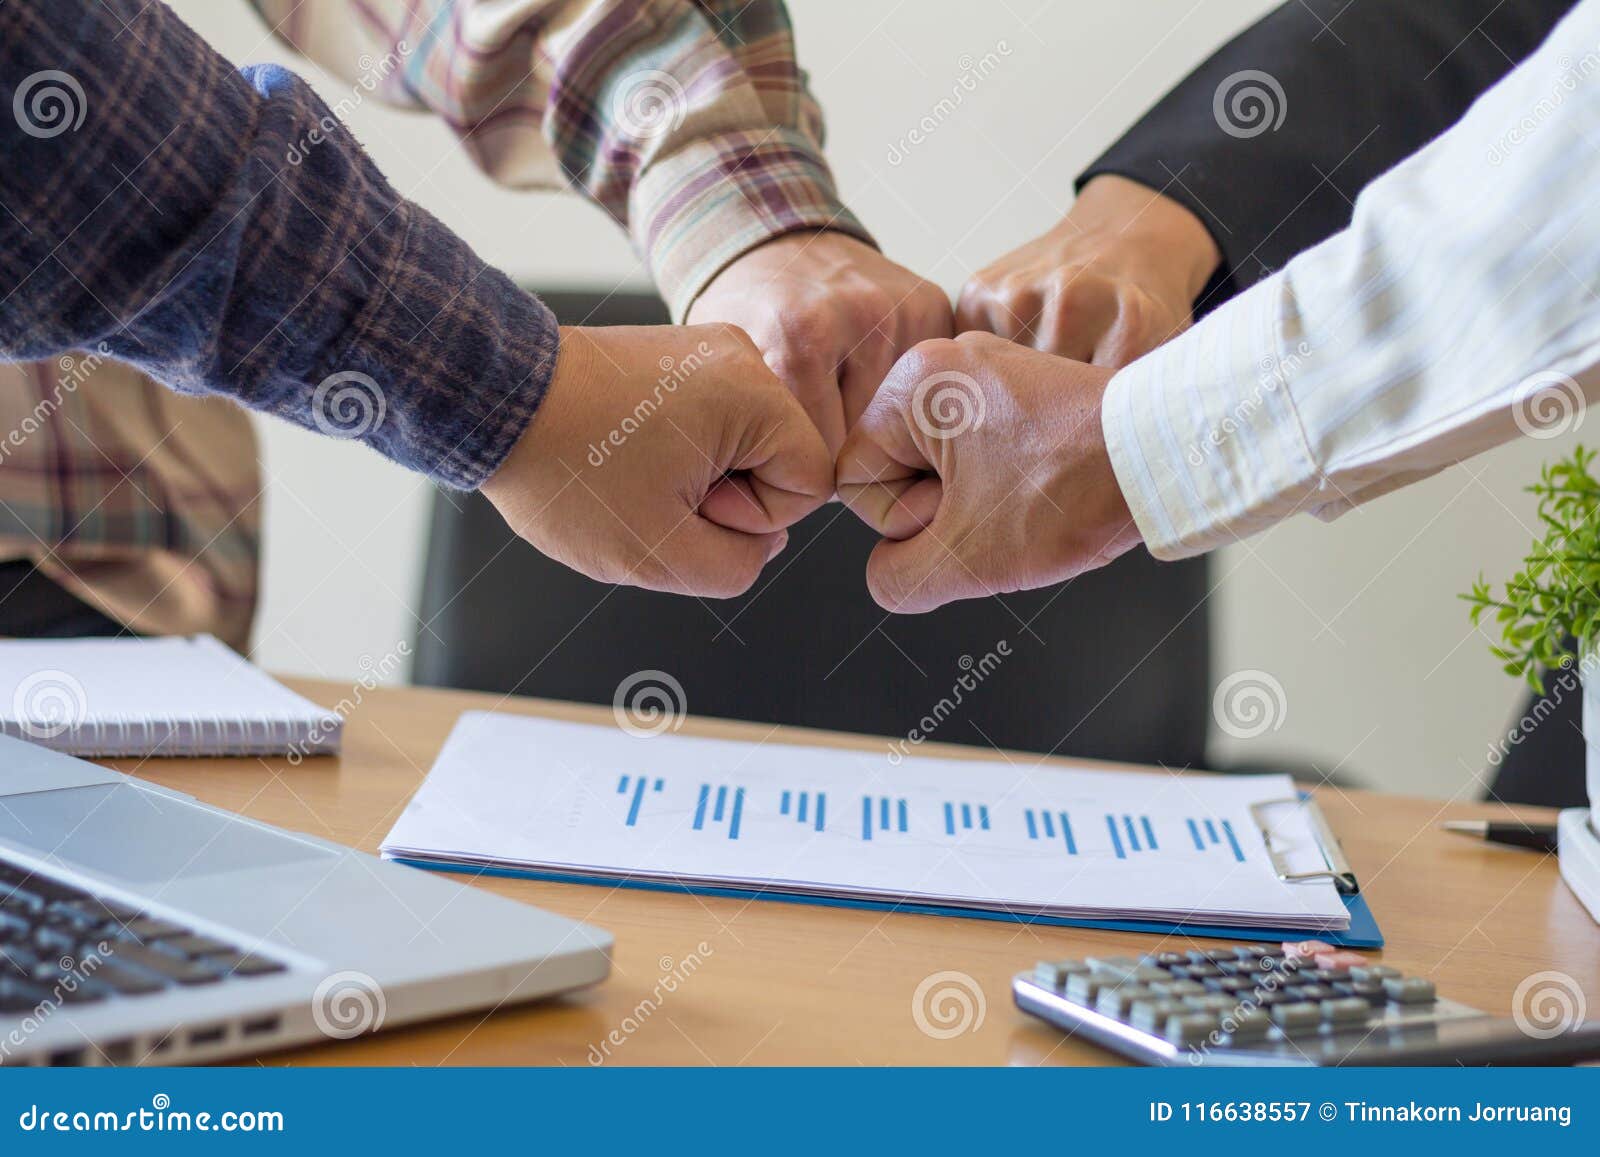 close-up of business partners making pile of hands at meeting,team work